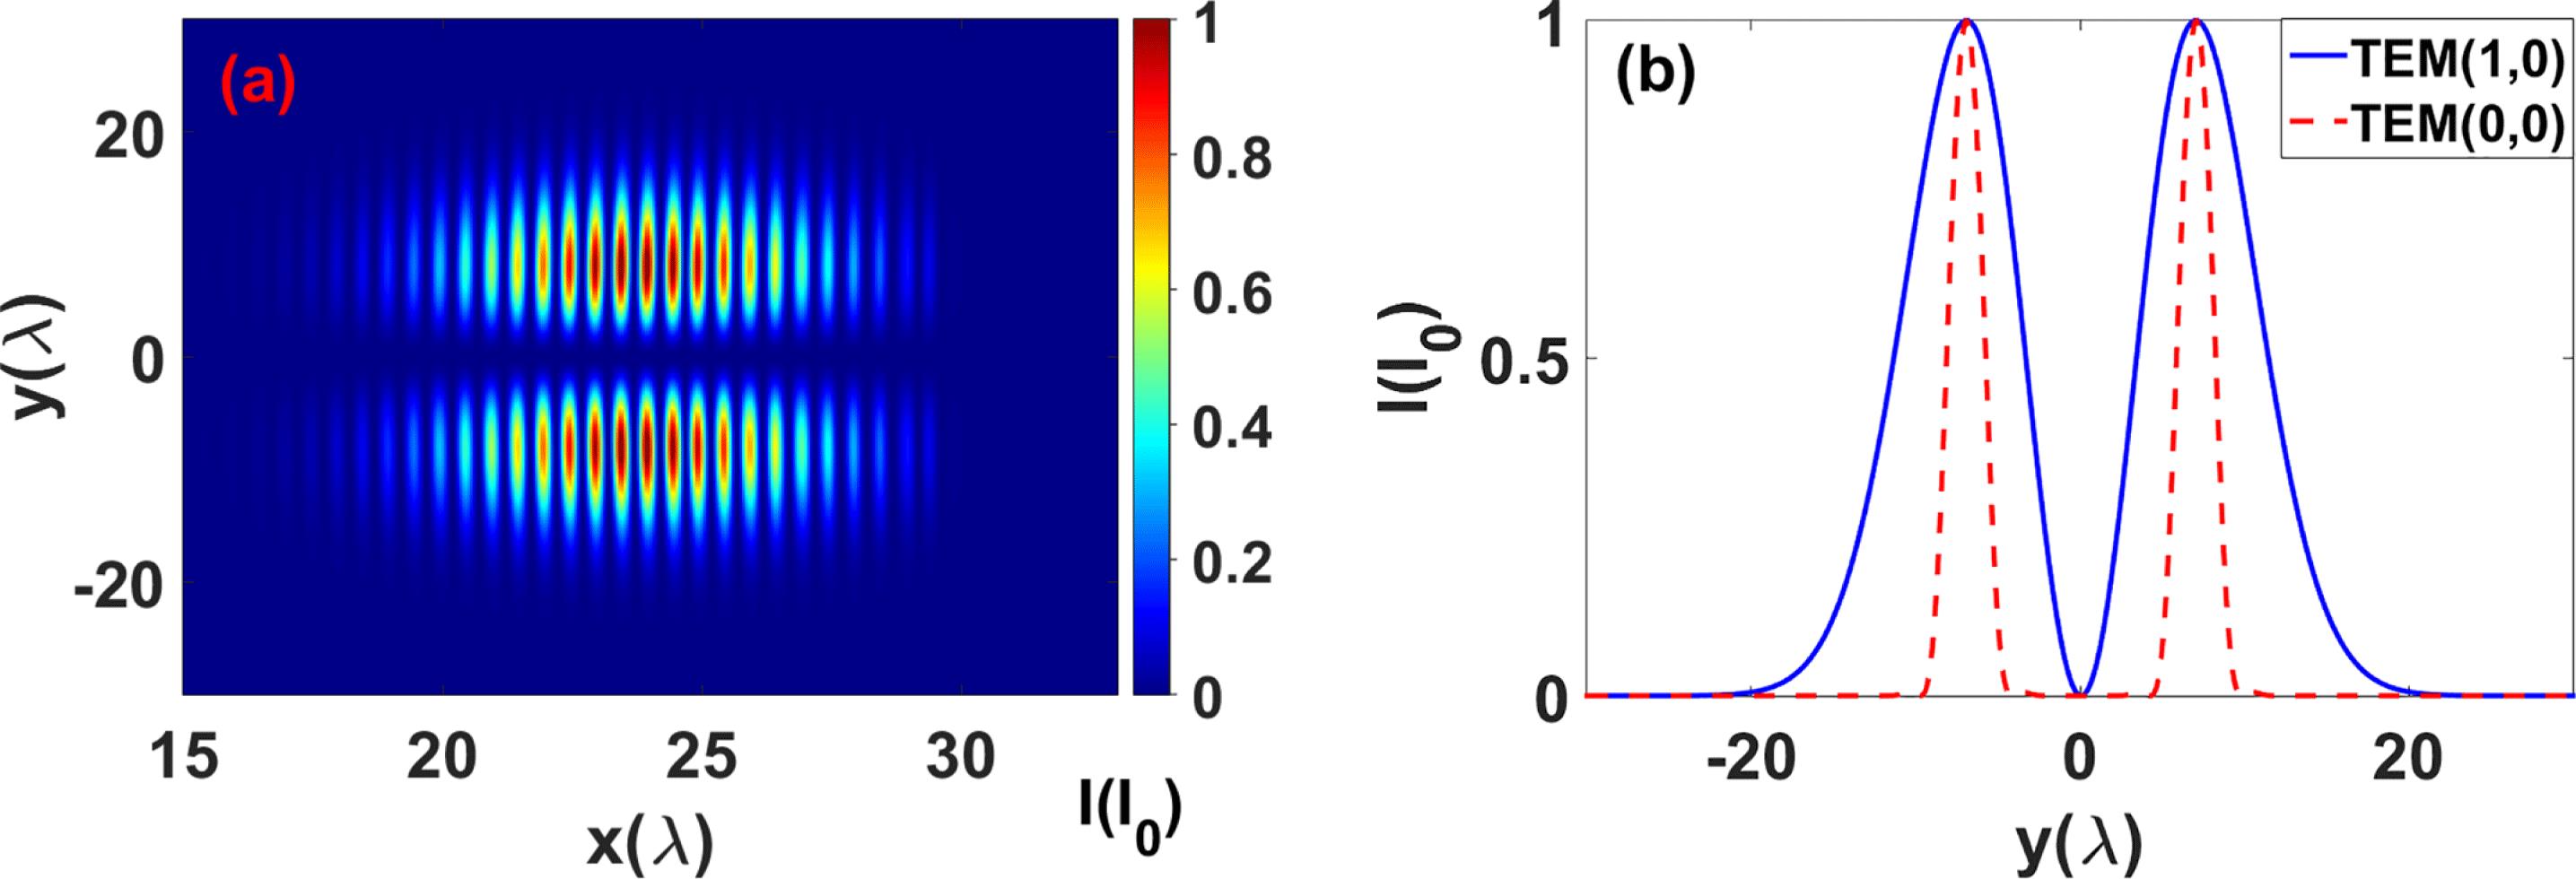 (a) The distribution of the Poynting flux (normalized to the peak intensity) of TEM(1,0) mode laser pulse. (b) The intensity profile of TEM(1,0) mode (blue solid line) and TEM(0,0) mode (red dashed line).